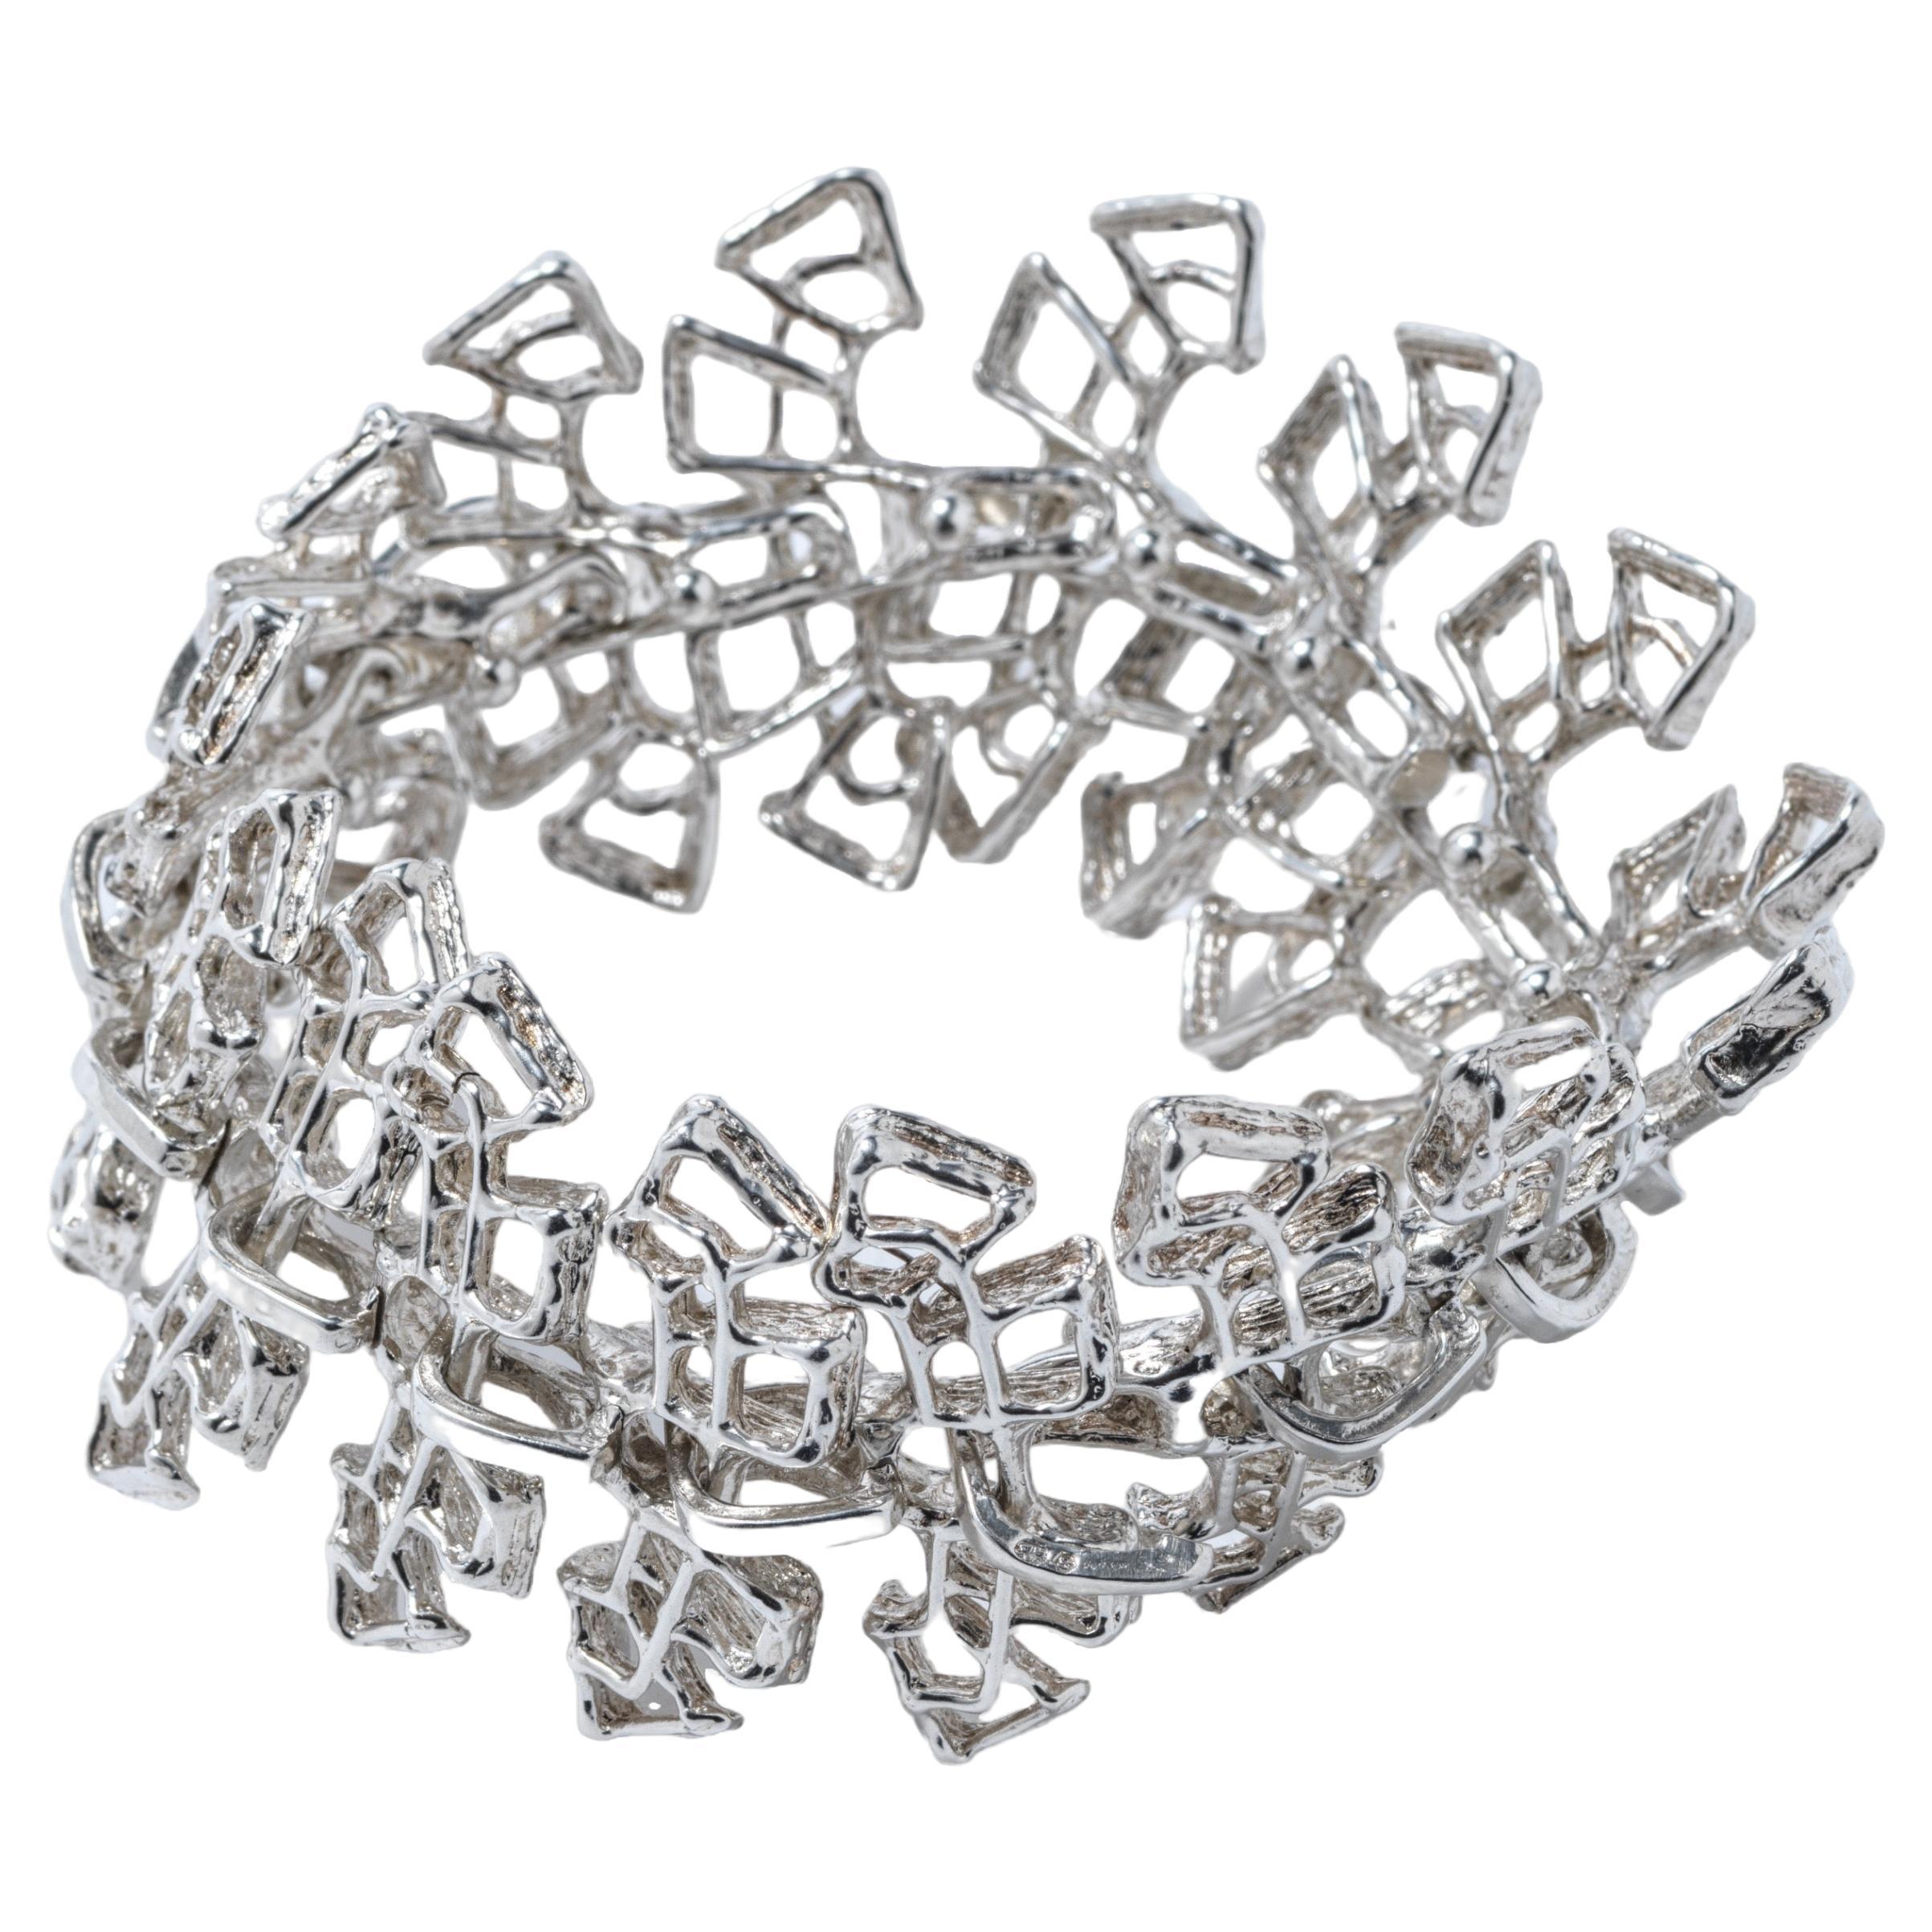 This bracelet is made by the Norwegian couple Else & Paul Hughes. Paul was born in England but come to work in Norway. Else and Paul set up their studio in Norway 1959 and was an important part of the studio silver movement in Norway.
This bracelet